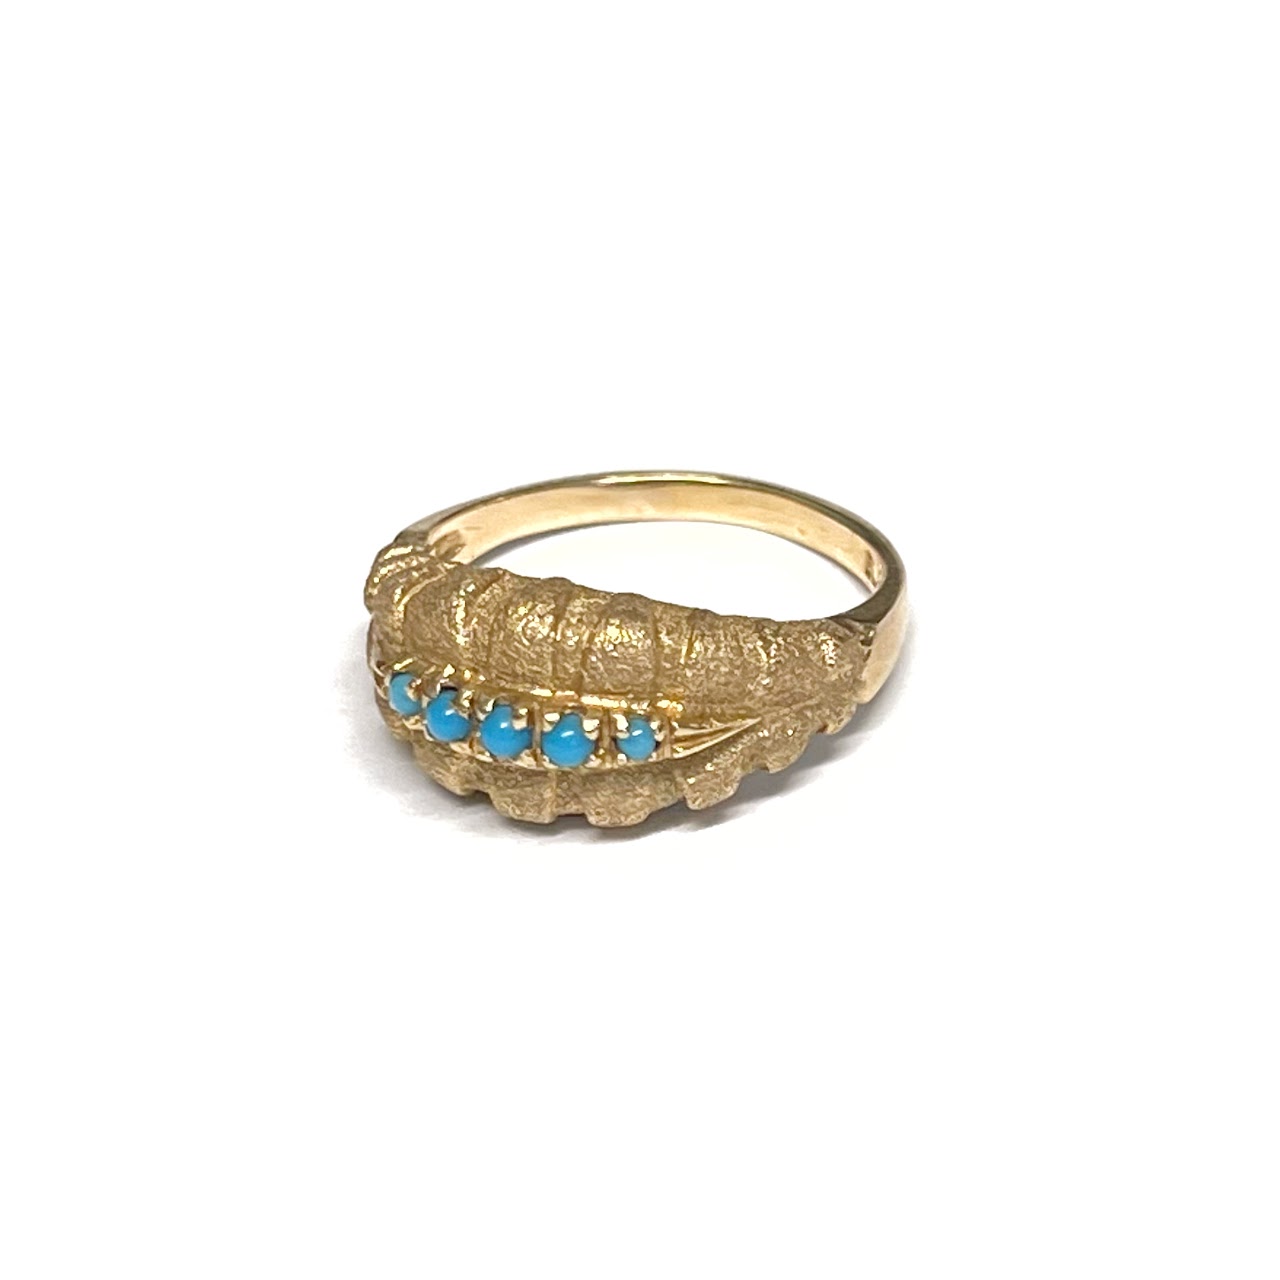 14K Gold Ring with Five Set Turquoise Beads